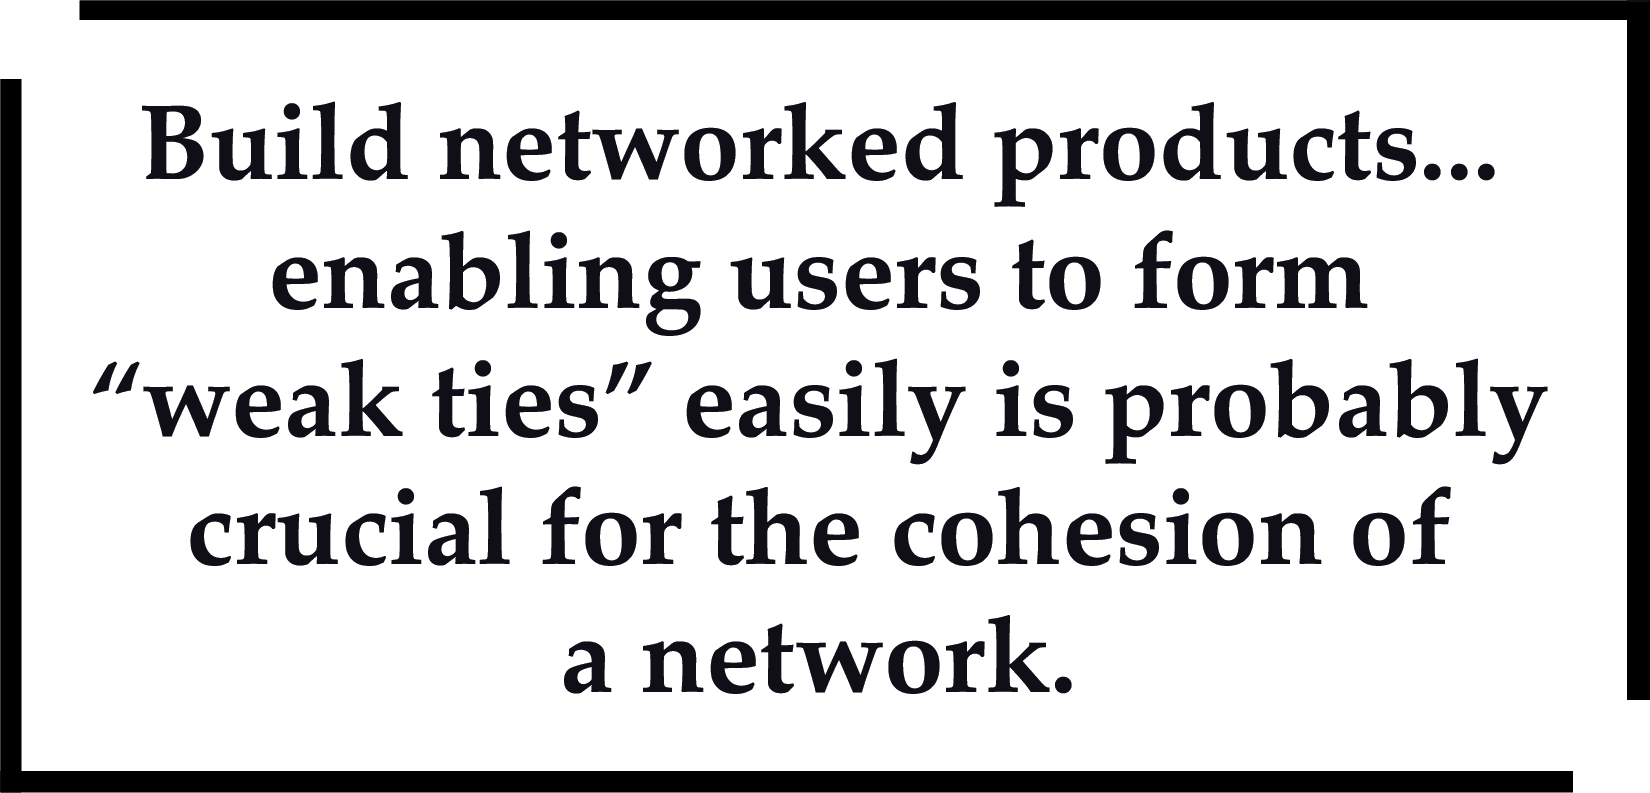 Build networked products enabling users to form 